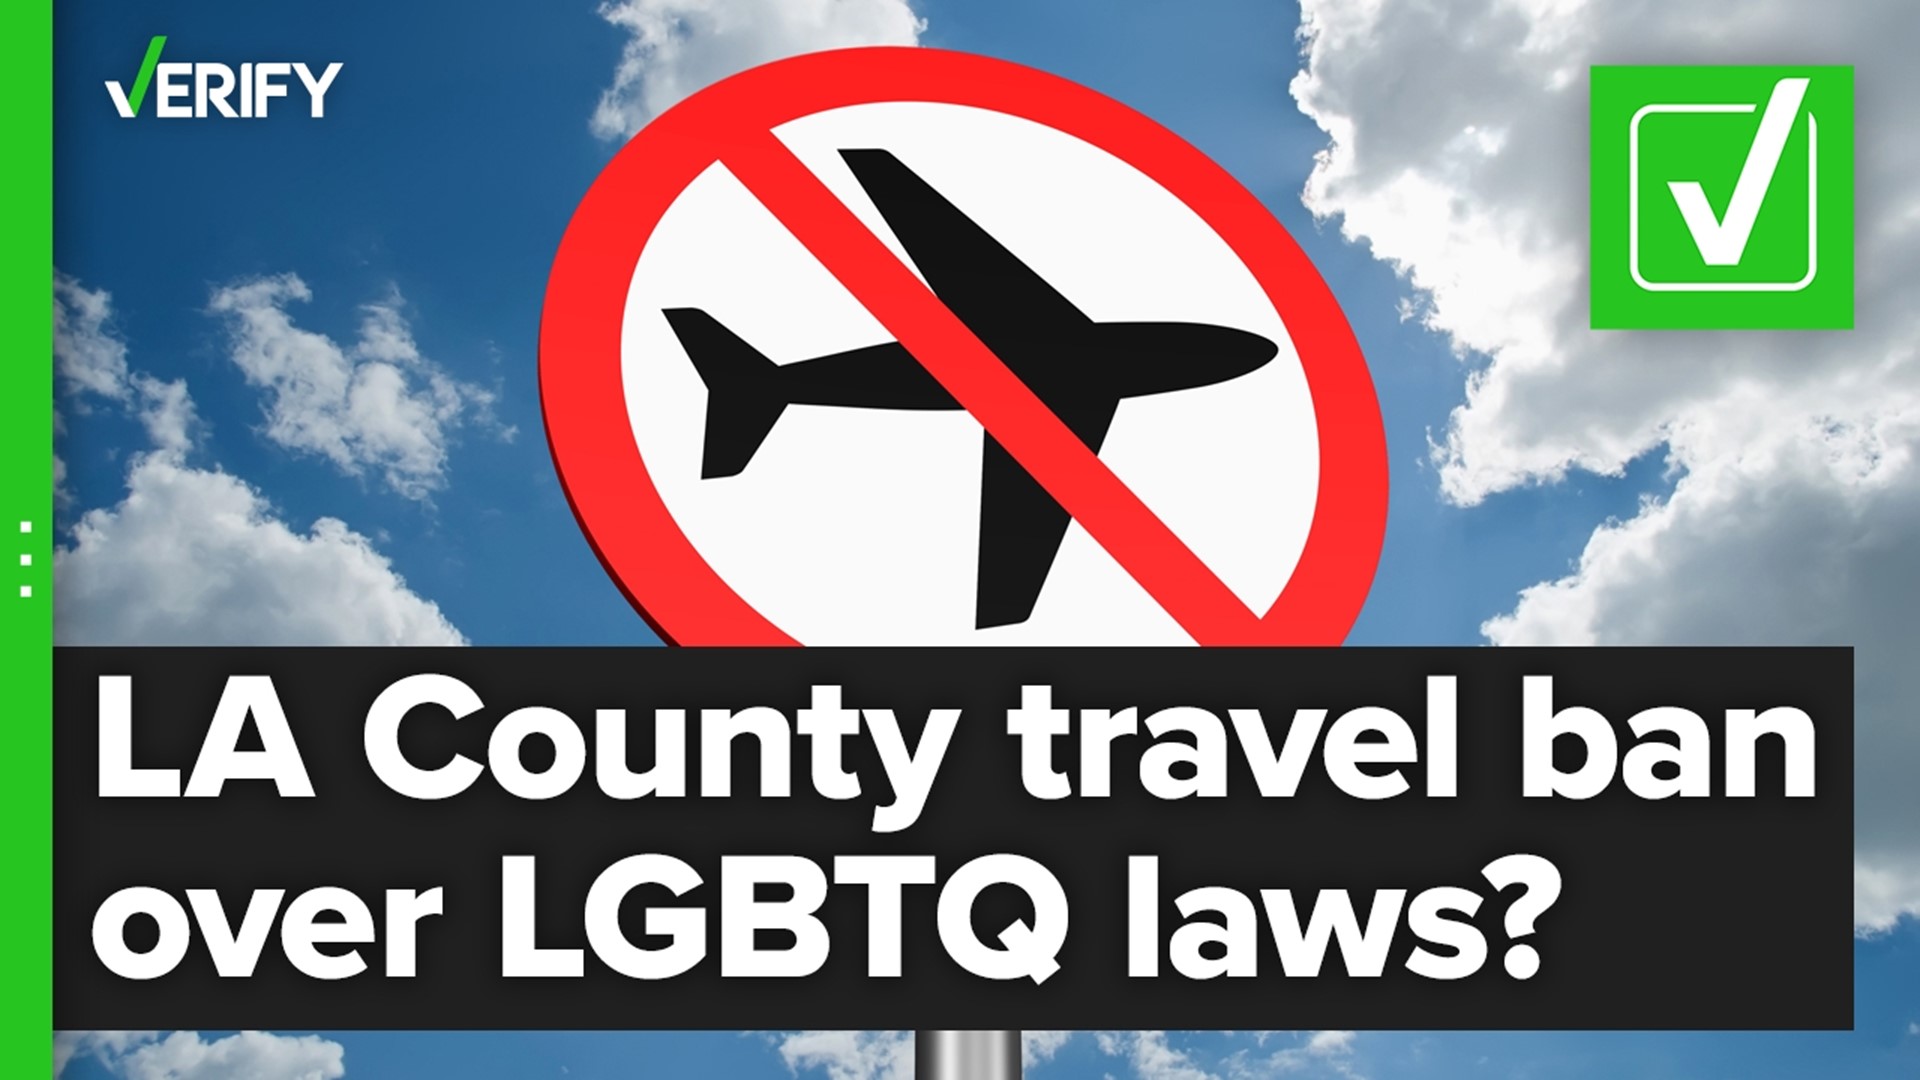 The Los Angeles County Board of Supervisors banned government-funded travel to Texas and Florida over LGBTQ legislation. It does not apply to personal travel.